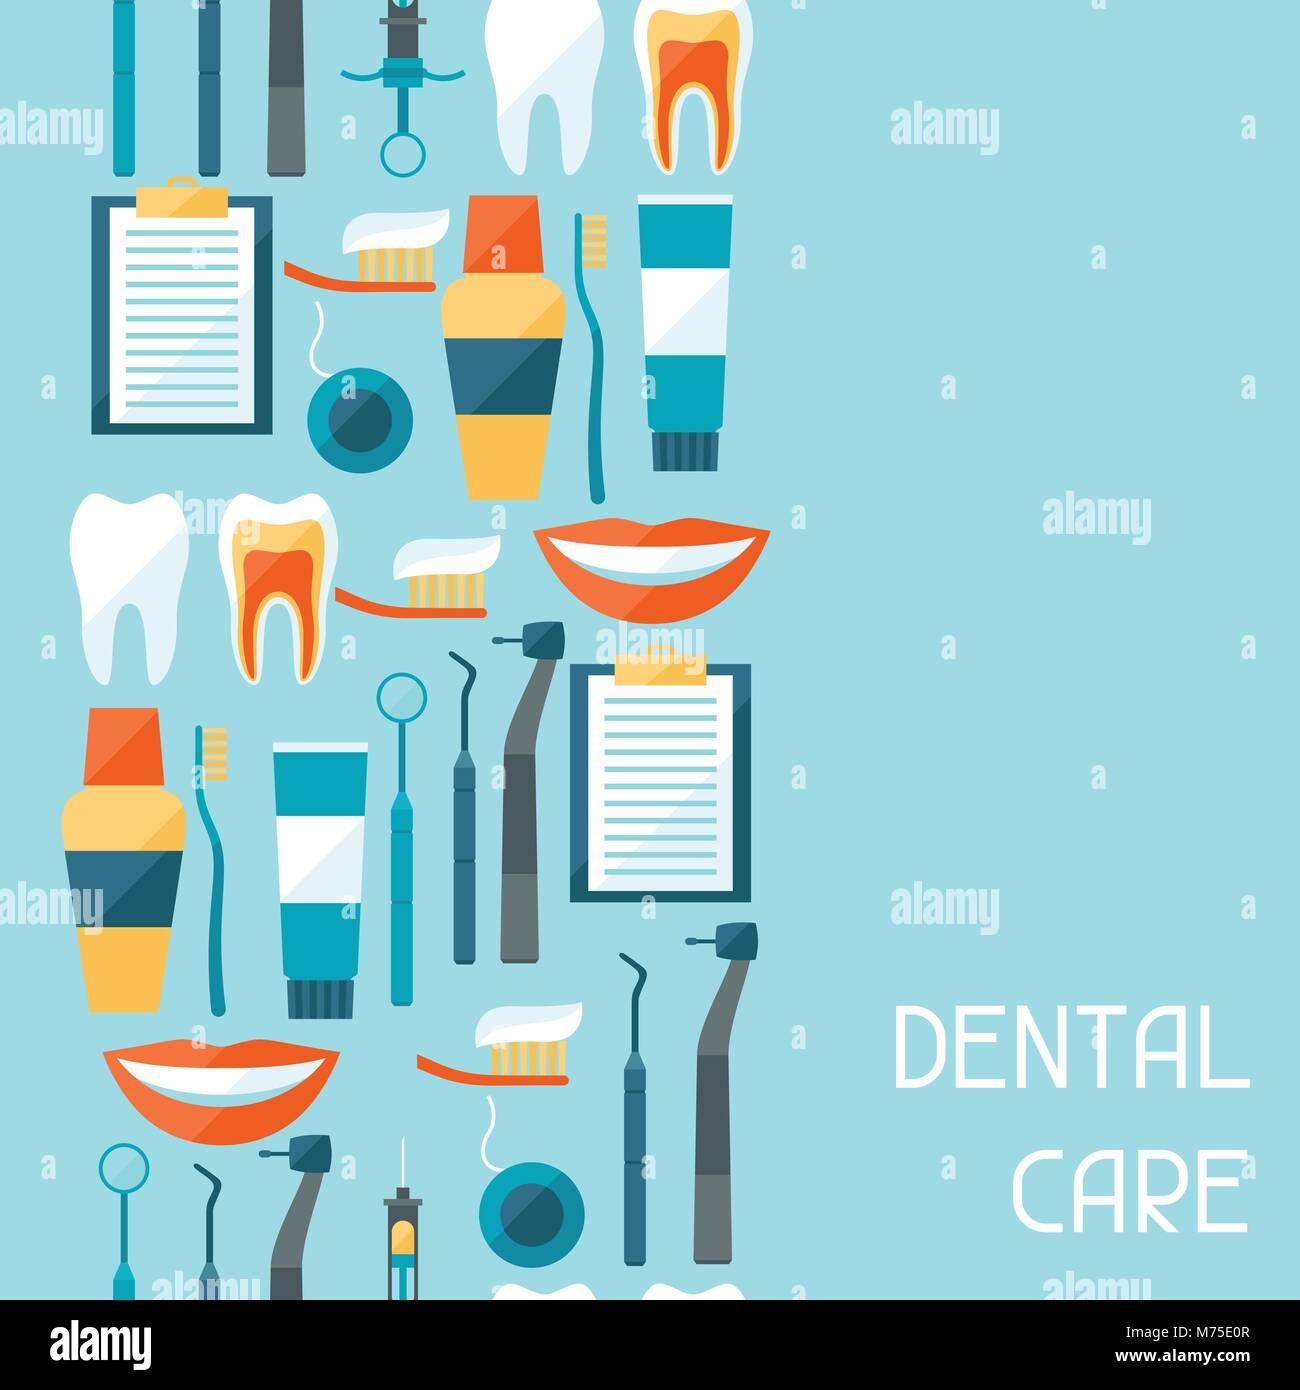 Medical seamless pattern with dental equipment icons Stock Vector